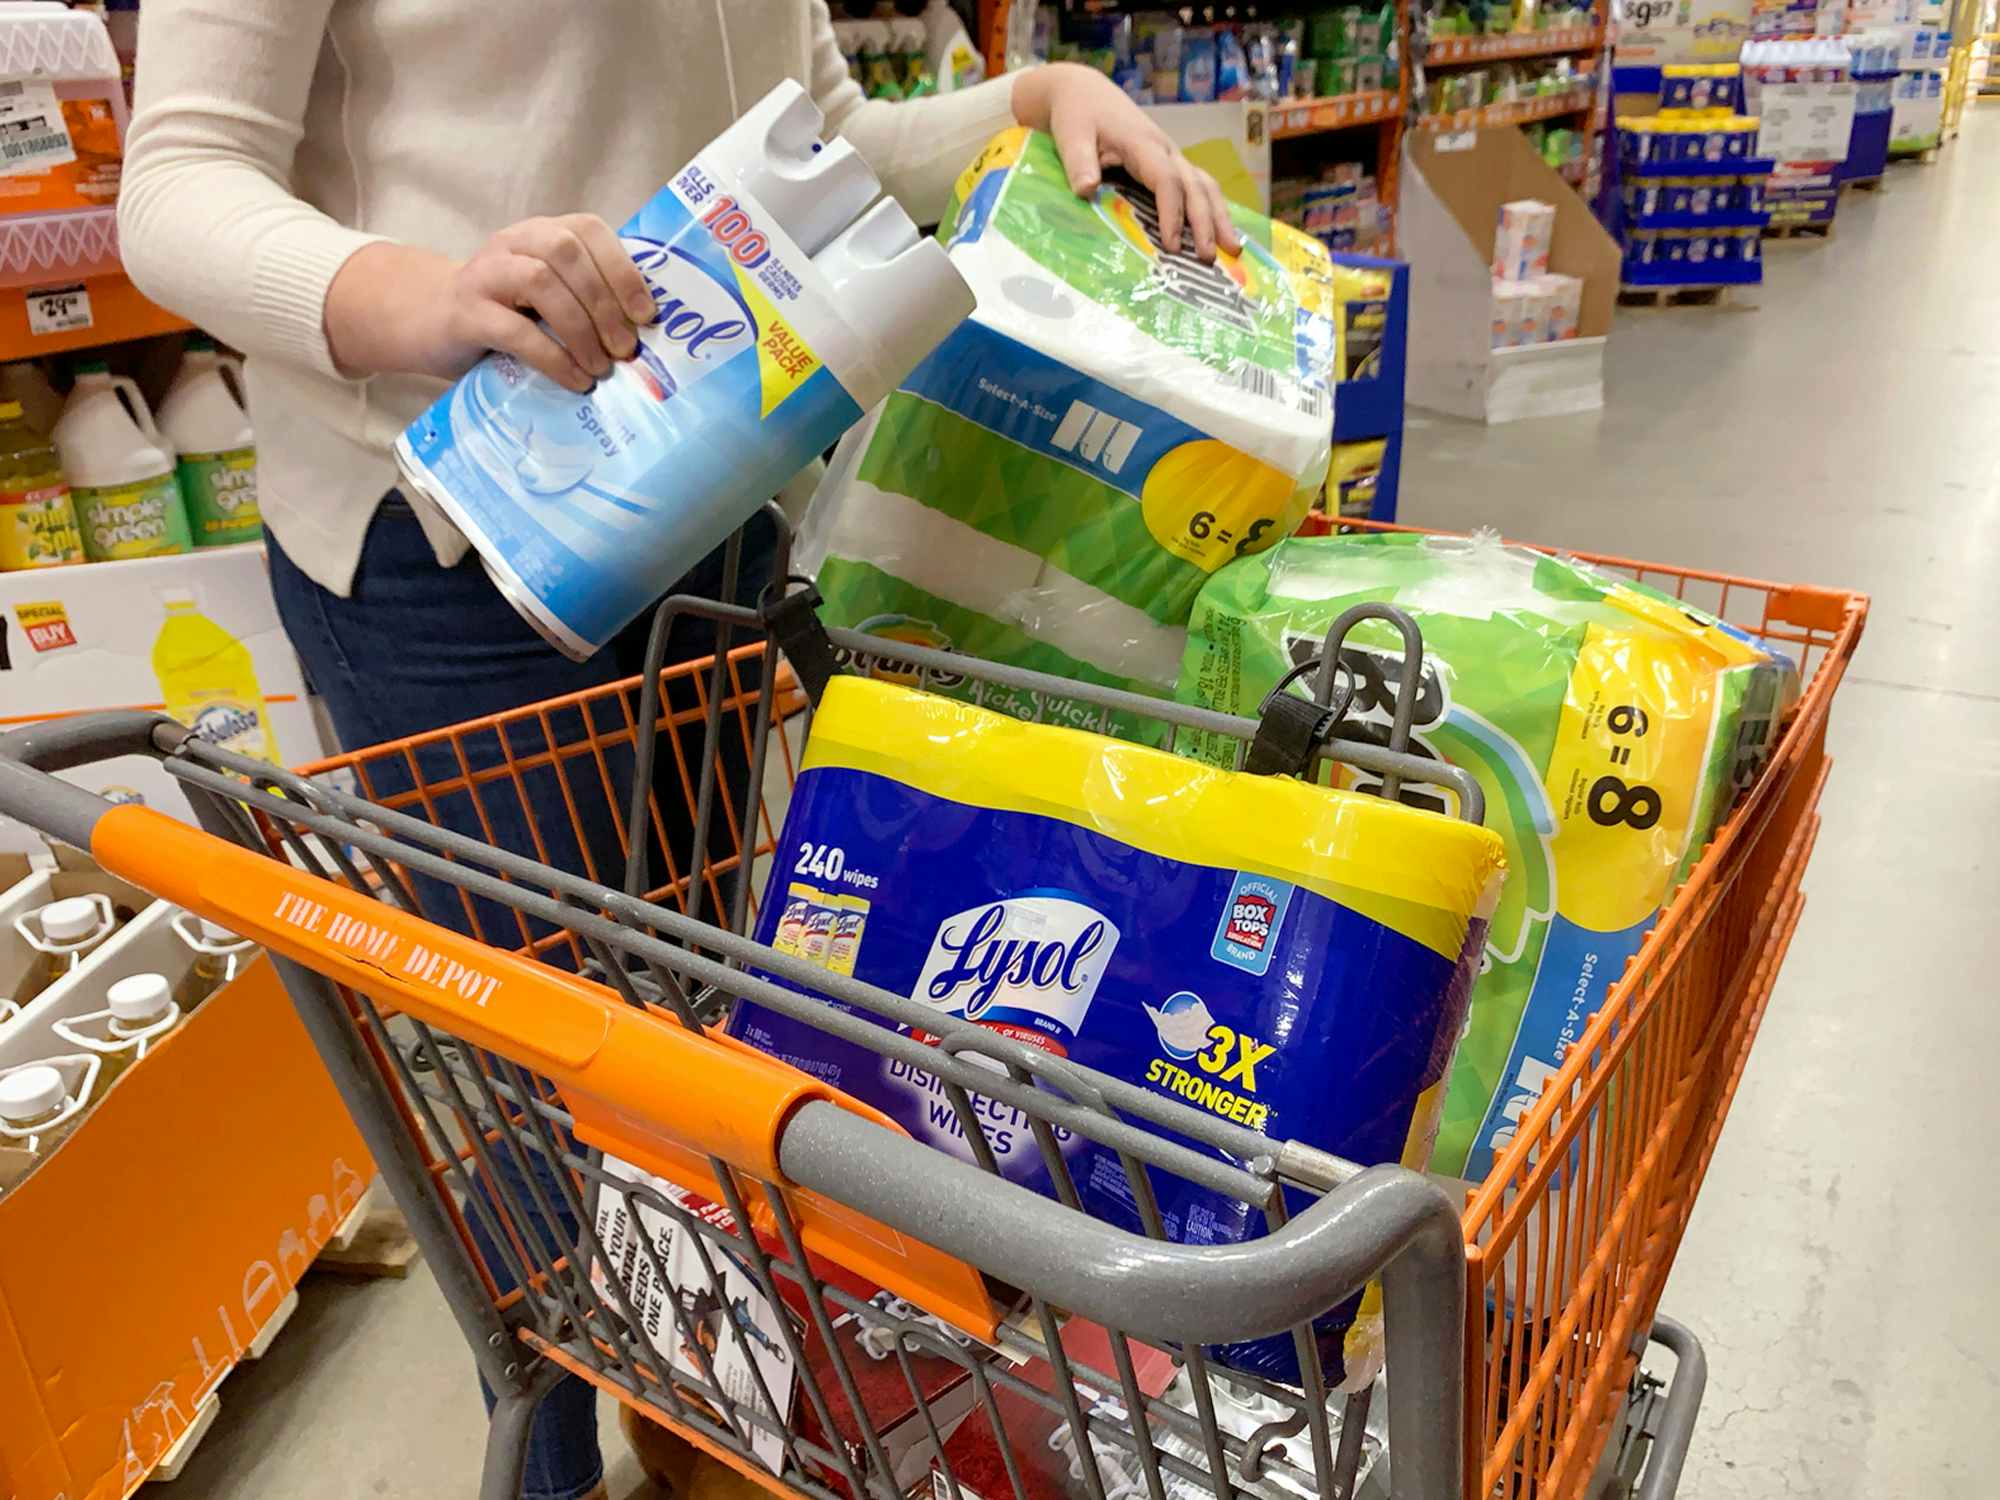 A Home Depot cart filled with cleaning supplies.